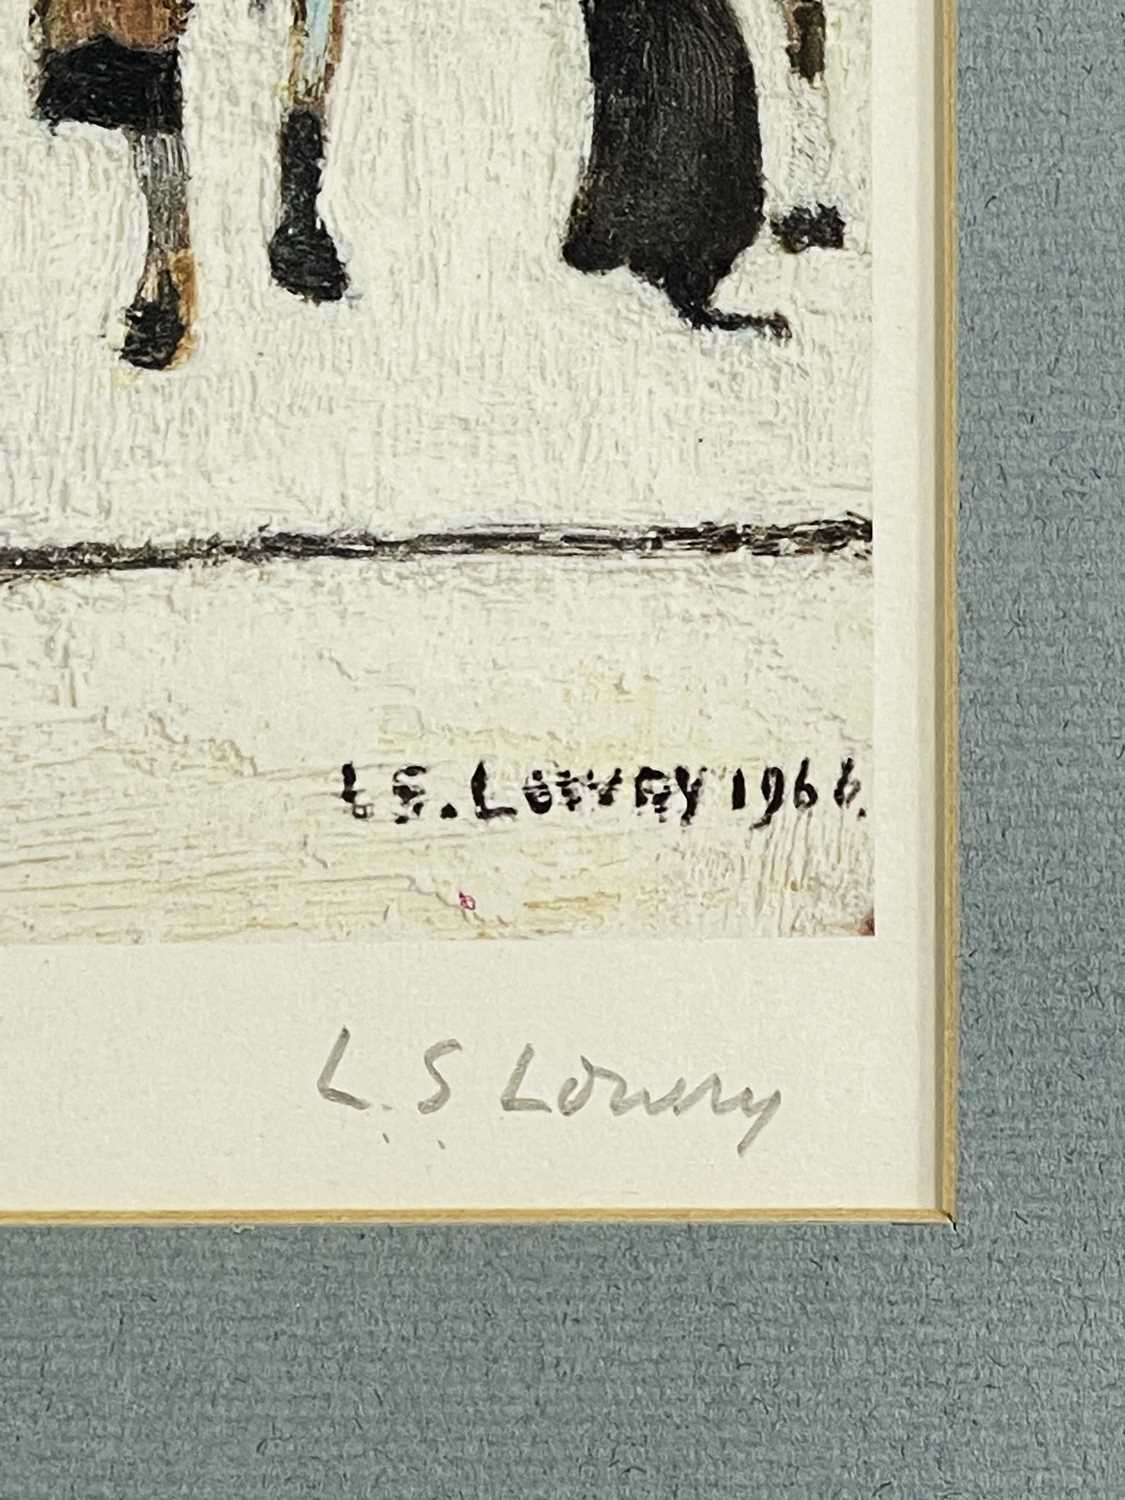 ‡ LAURENCE STEPHEN LOWRY RBA RA limited edition colour print - 'Group of Children', signed in pencil - Image 4 of 6